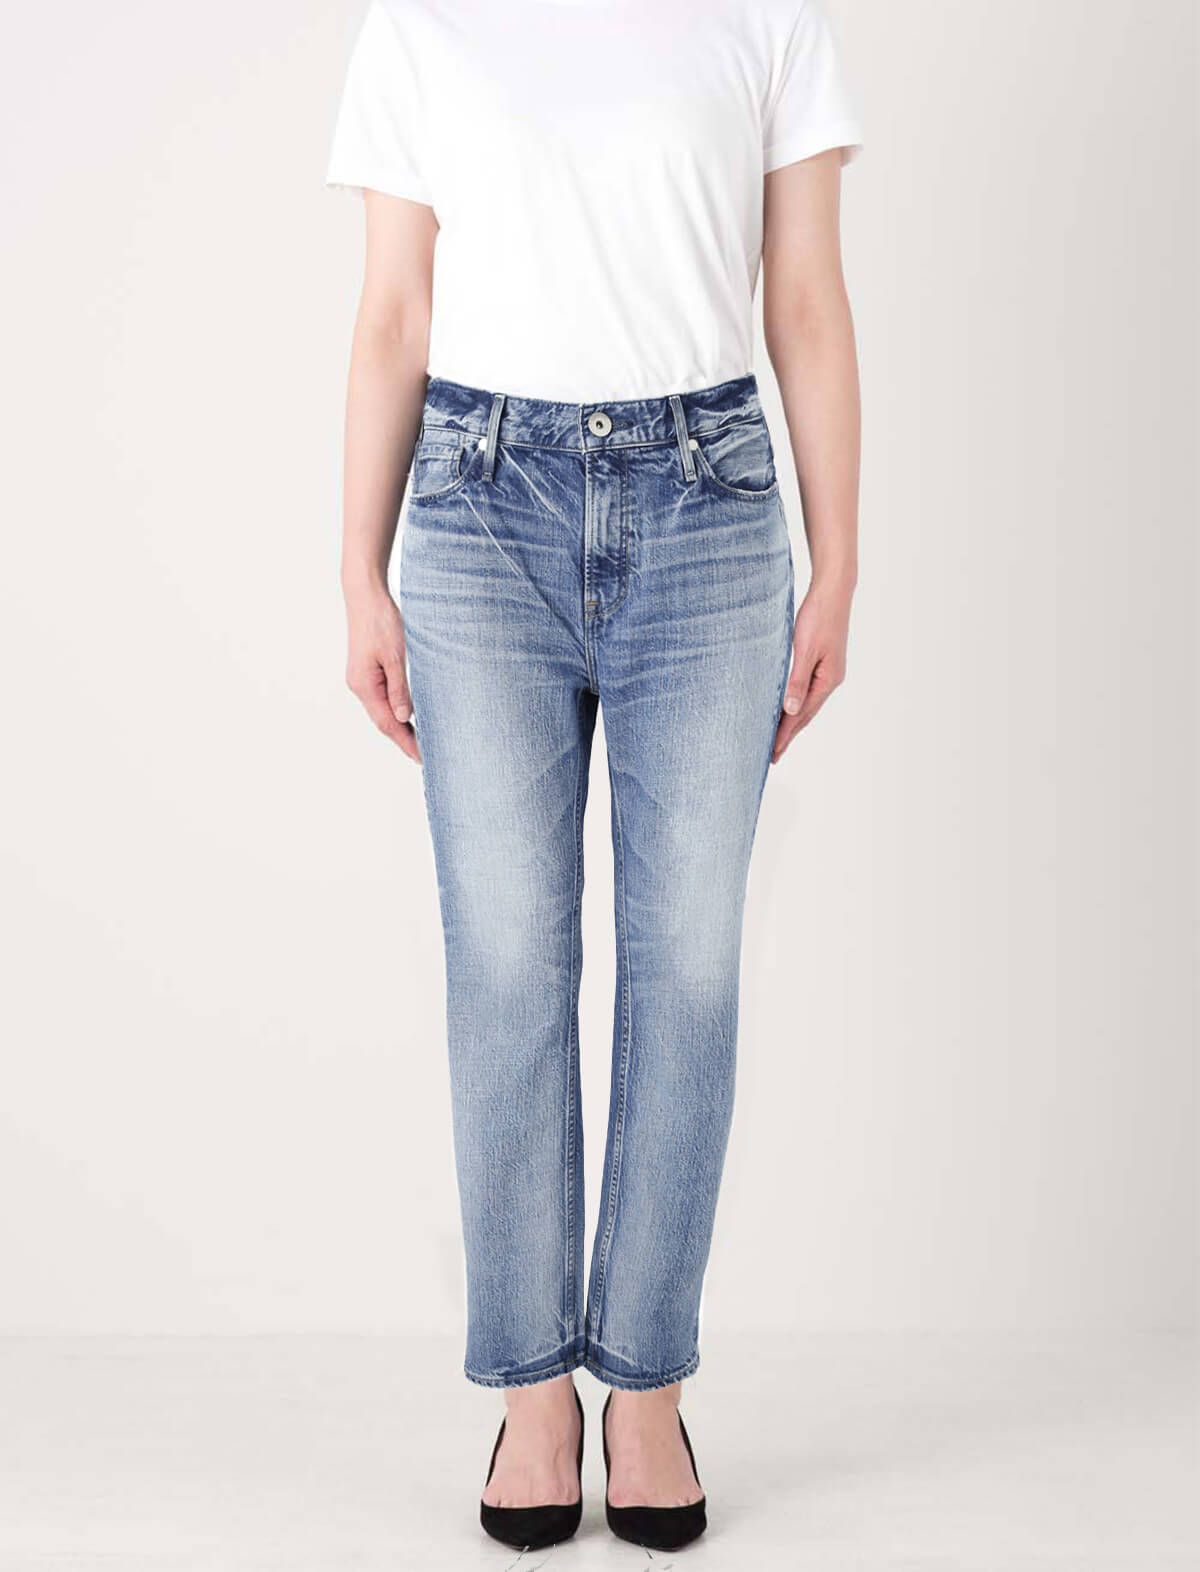 UPPER HIGHTS The Lipstick Midrise Straight Jeans in Topaz